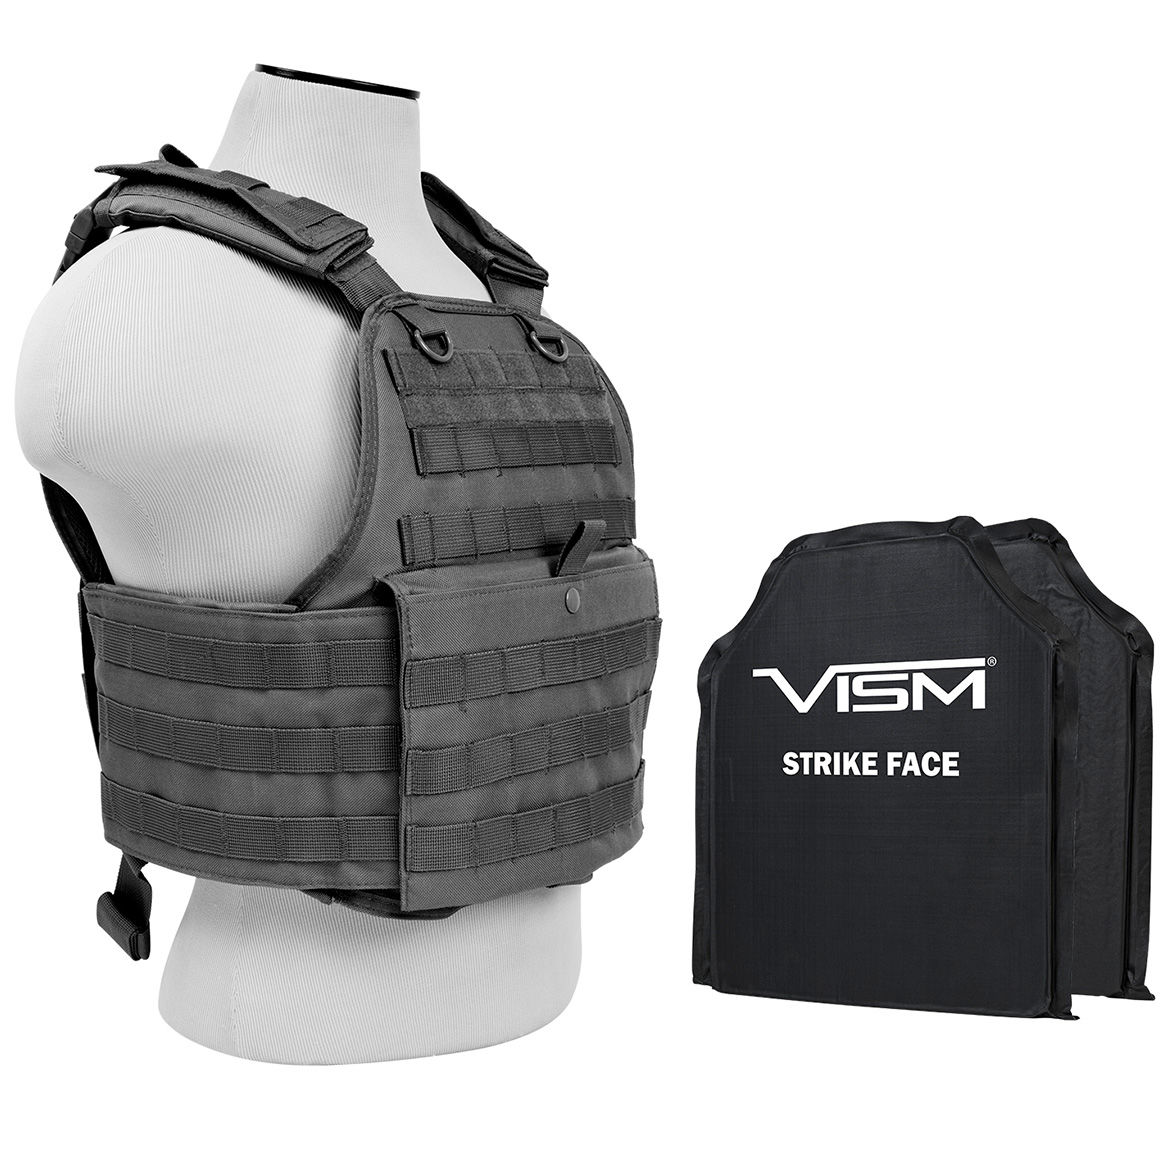 Bscvpcv2924u-a Soft Ballistic Panel And Plate Carrier Combo, Urban Gray